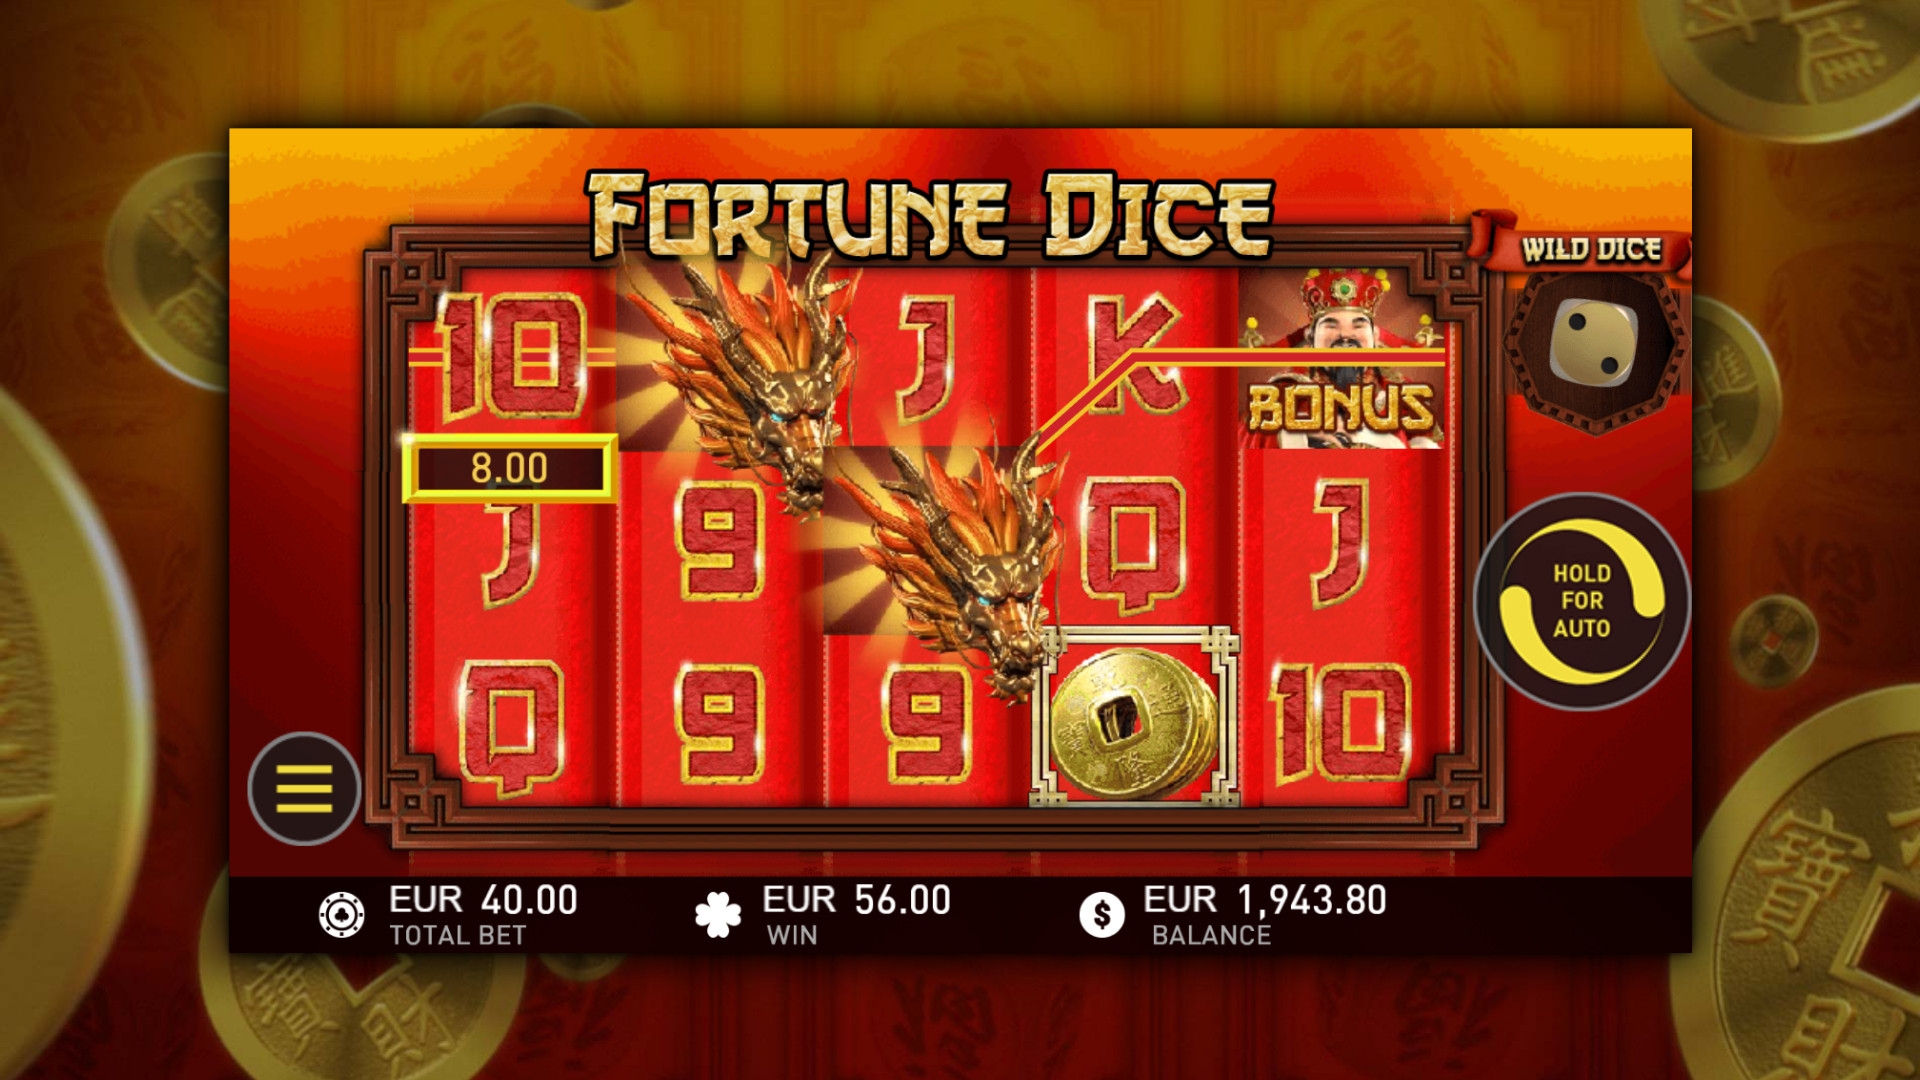 Fortune Dice (Fortune Dice) from category Slots